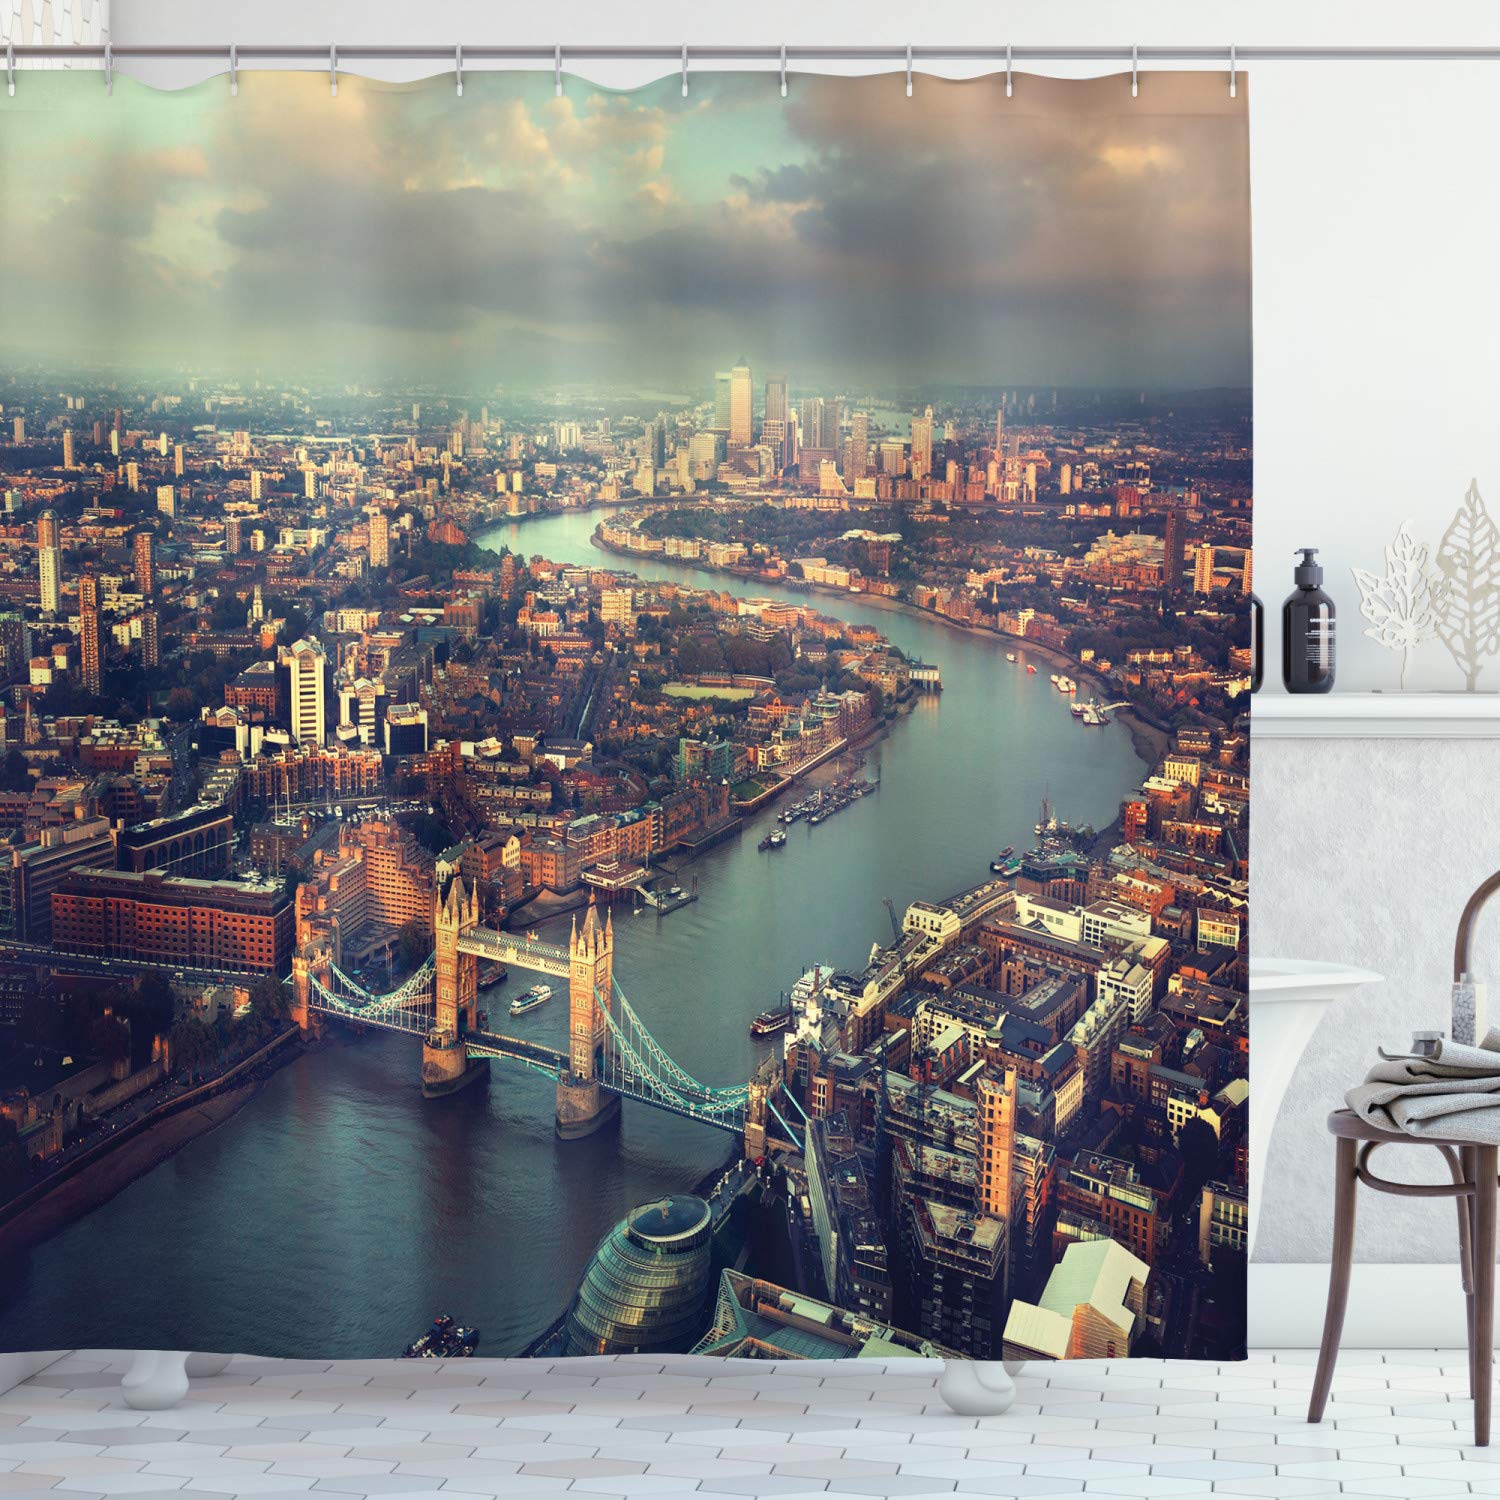 Ambesonne London Aerial View Decor Collection, Panoramic Picture of Thames River and Tower Bridge Picture Print, Polyester Fabric Bathroom Shower Curtain Set with Hooks, Blue Ivory Turquoise